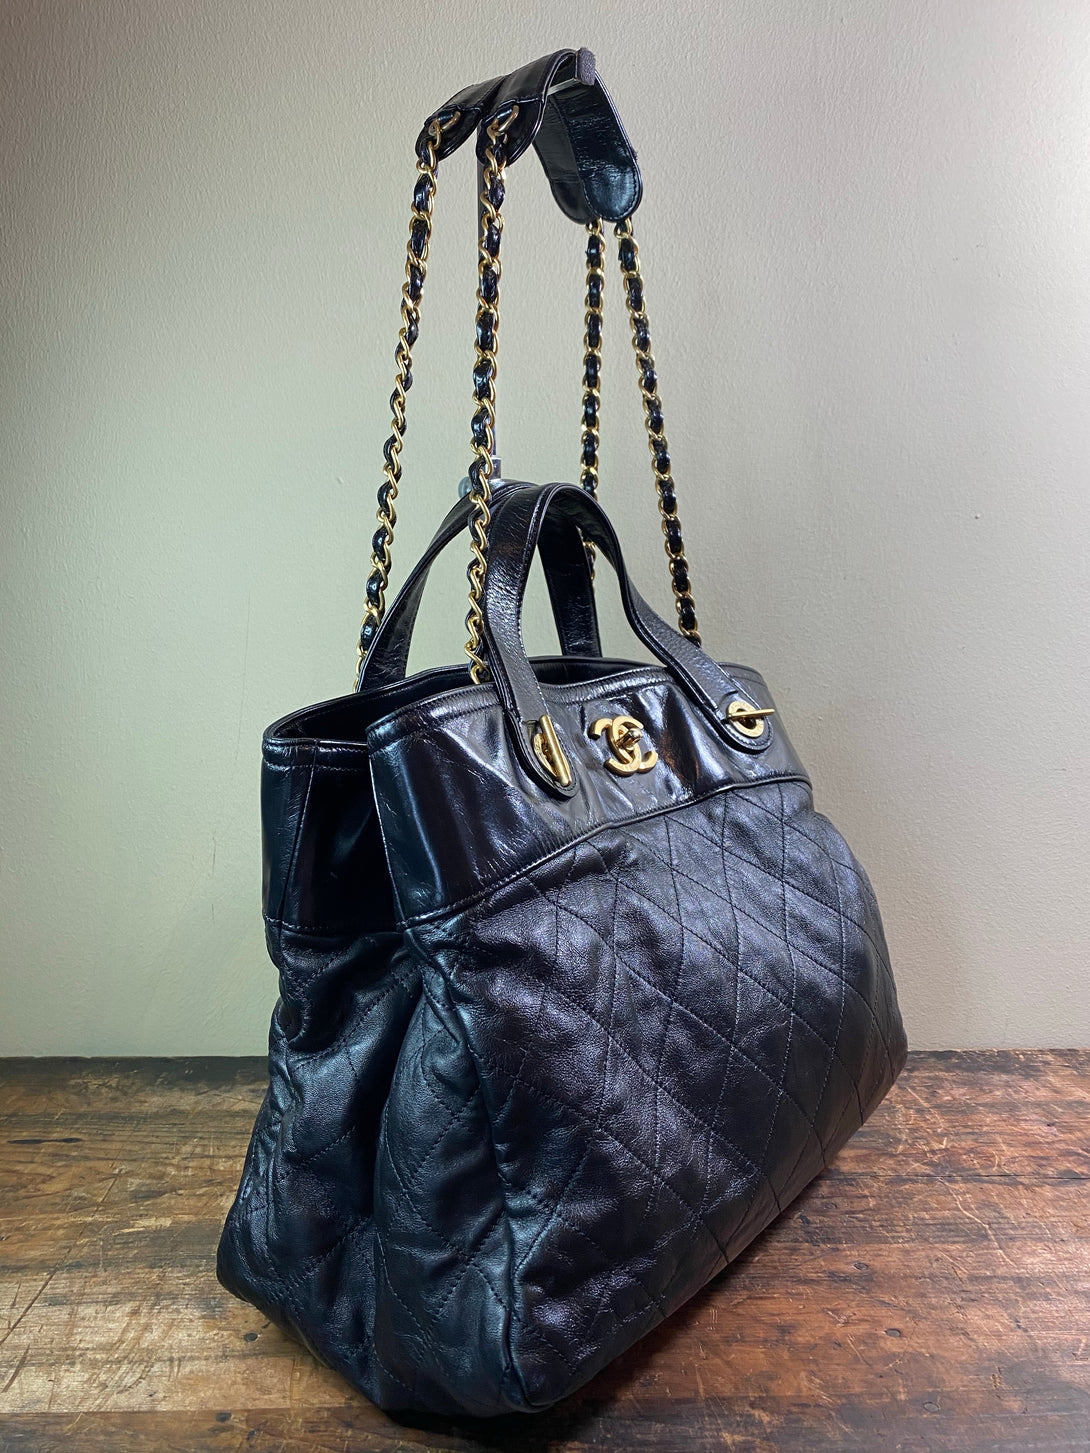 Chanel Two Way Leather "In the Mix" Tote - Siopaella Designer Exchange